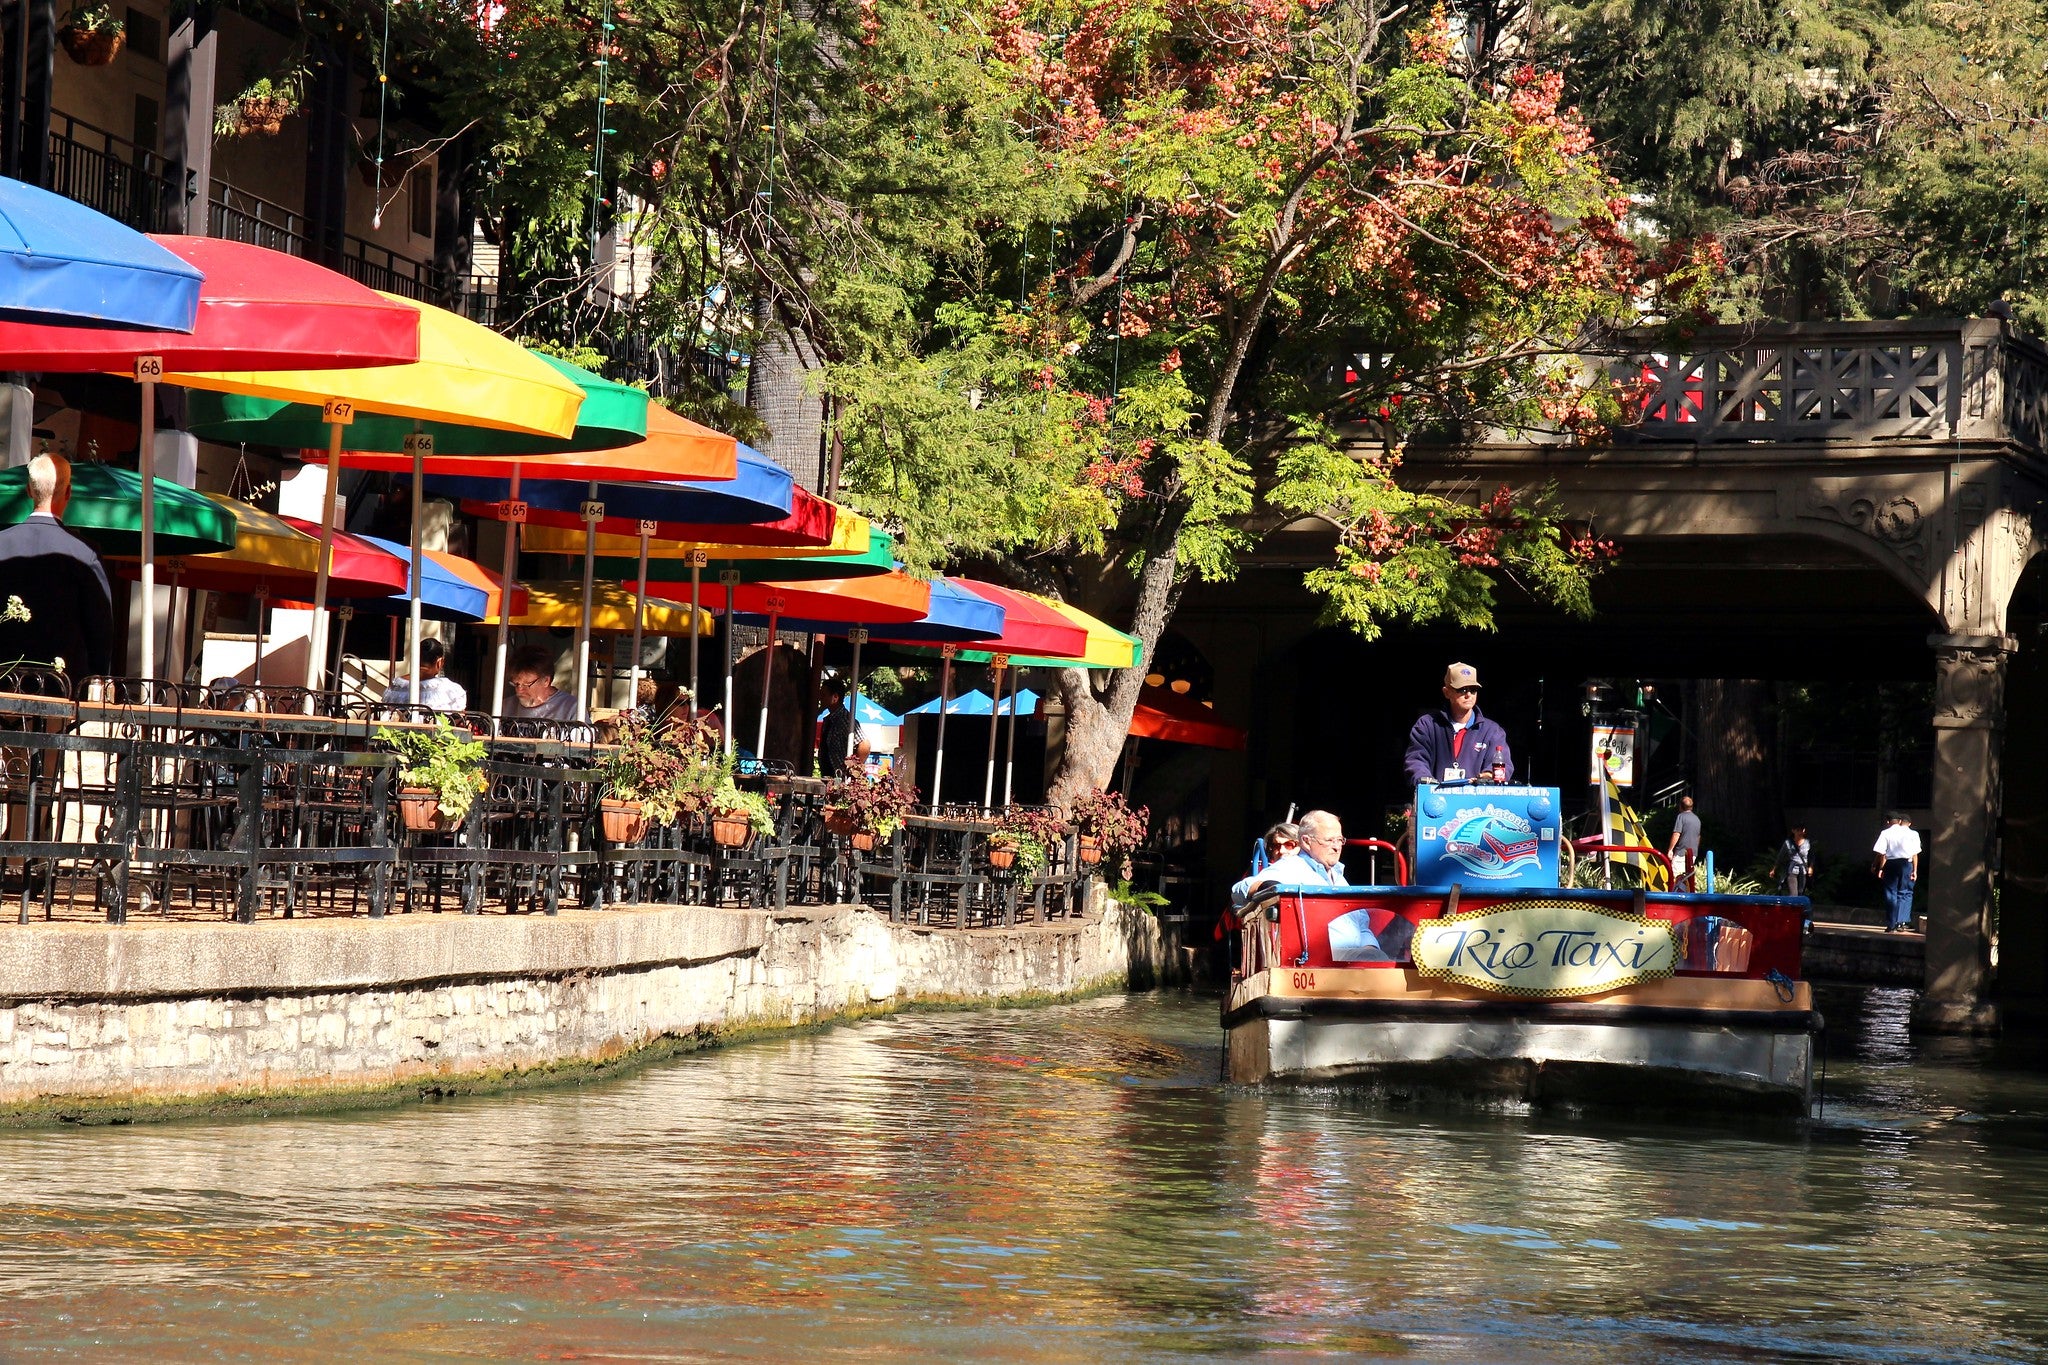 San Antonio Conventions and Tourism Exploring the Heart of Texas